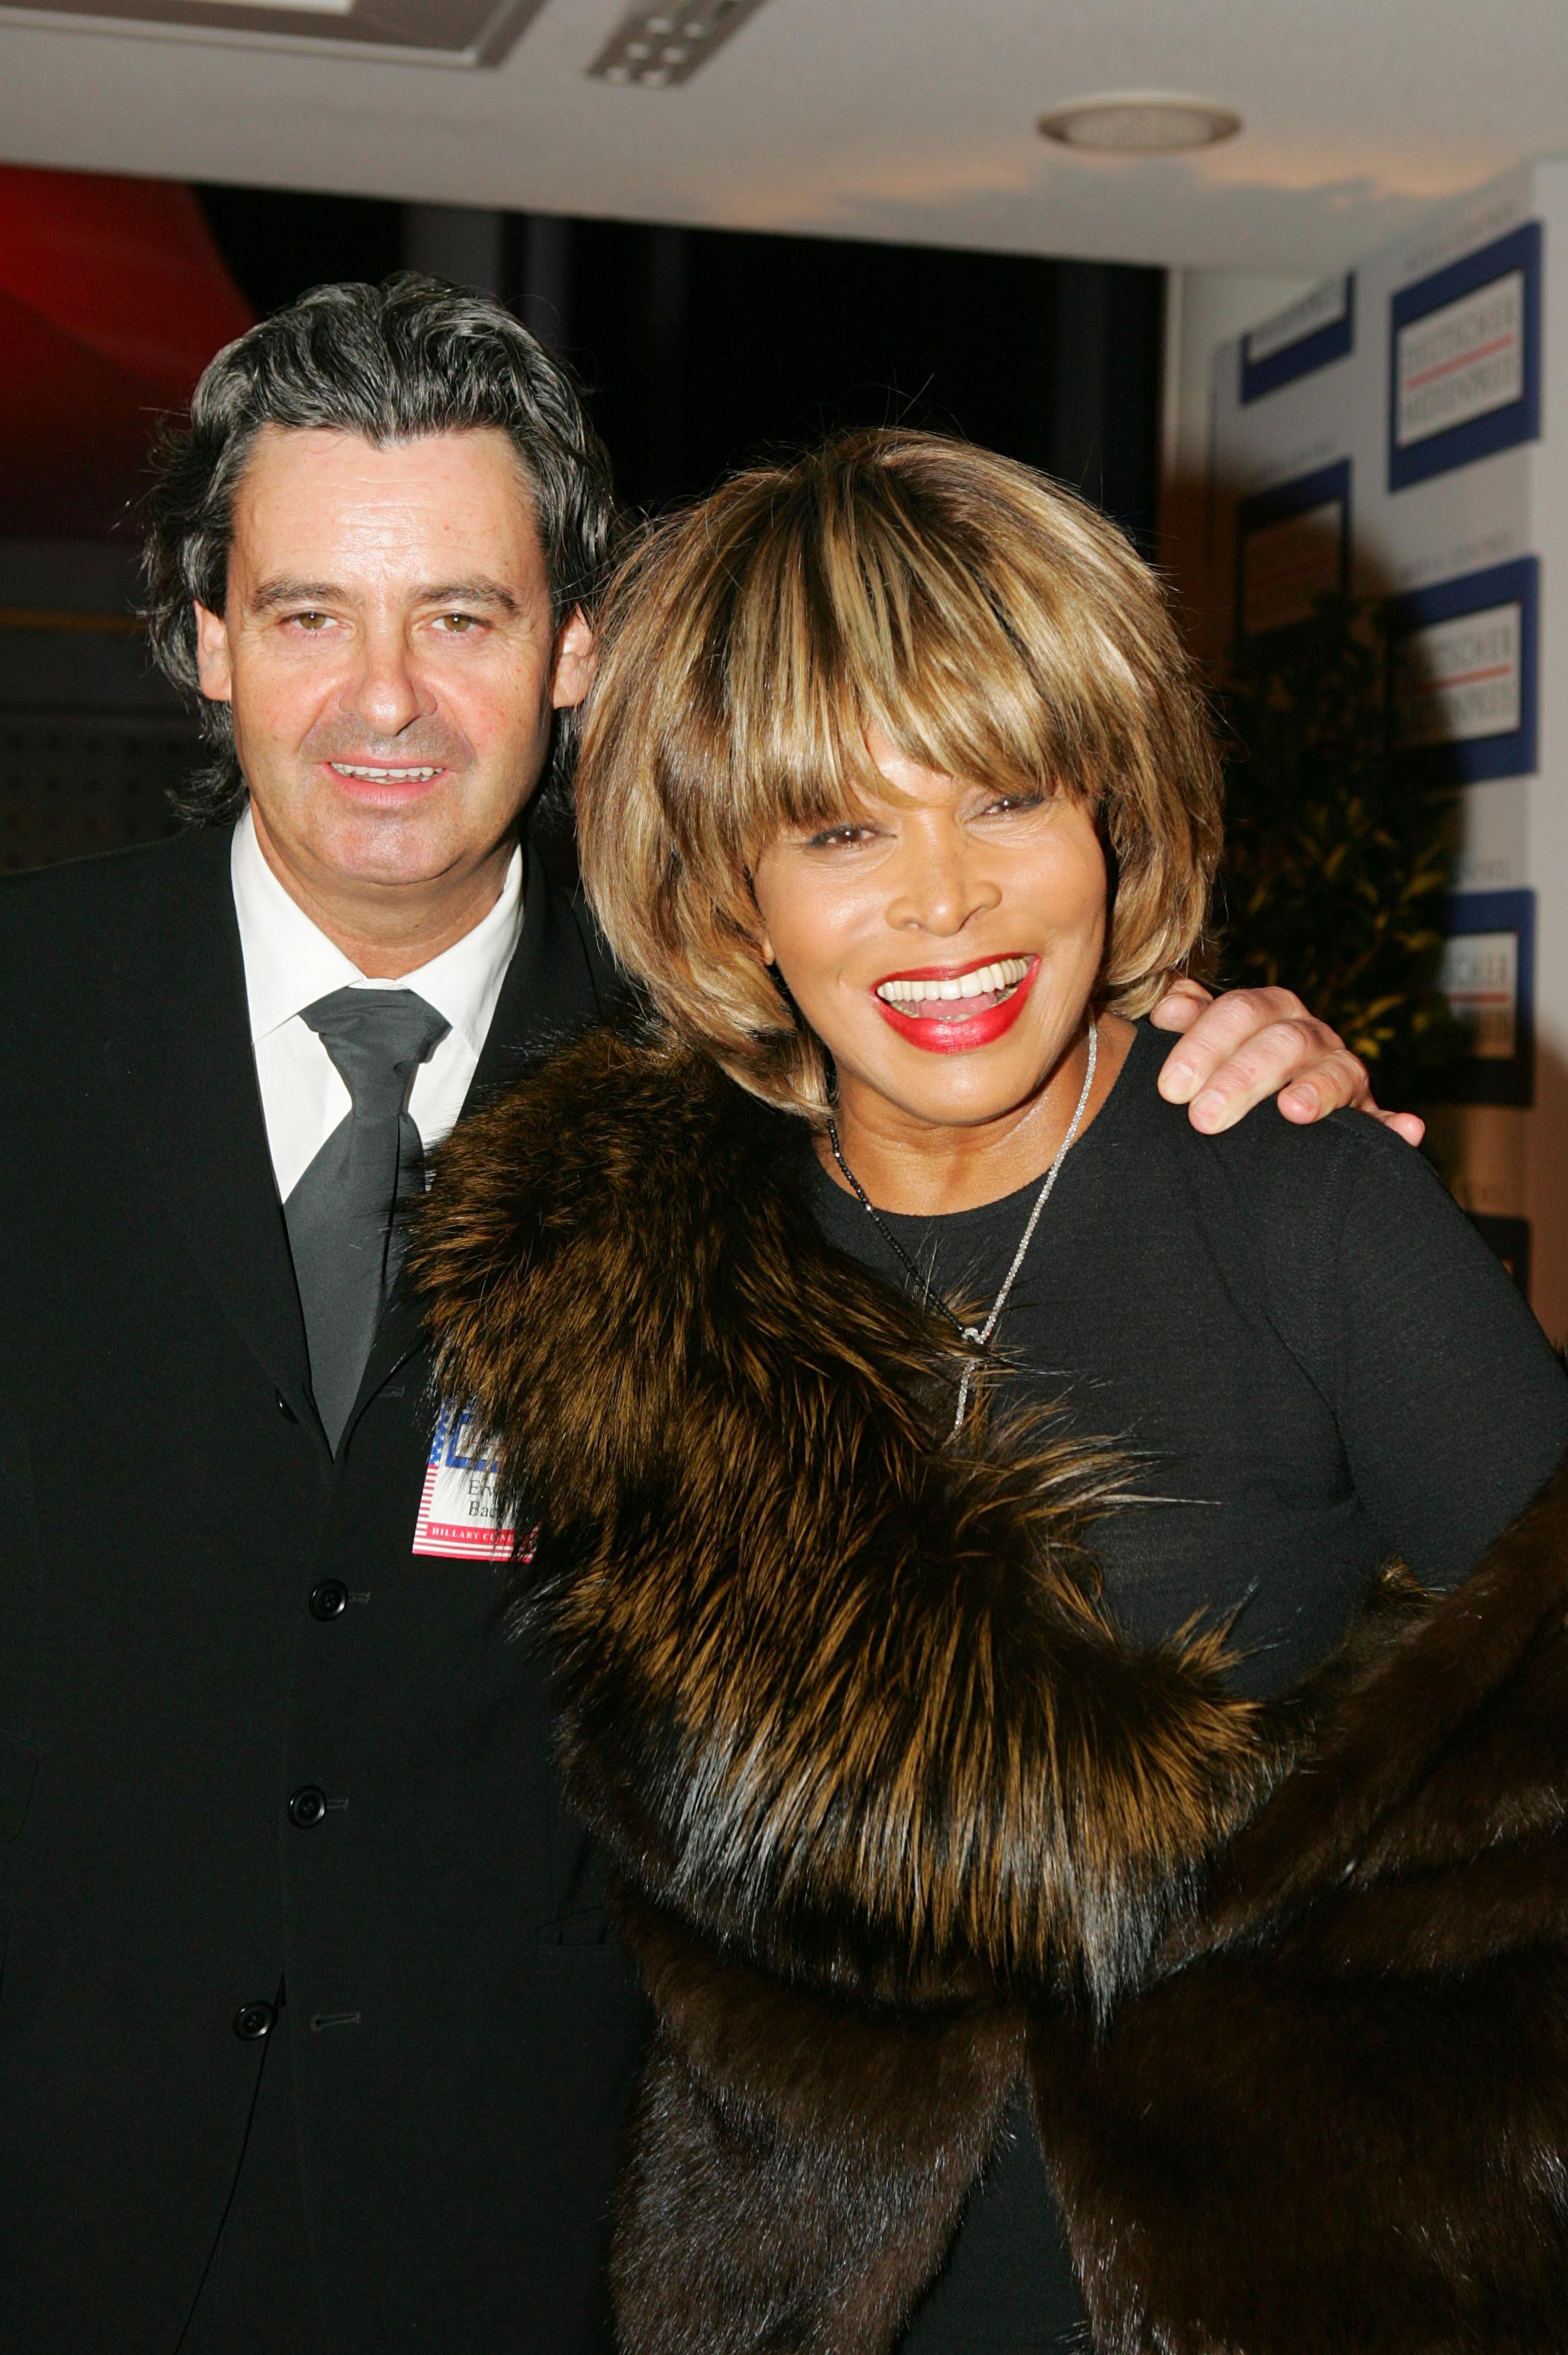 Erwin Bach and Tina Turner at the "Deutschen Medienpreis" event in 2005 | Source: Getty Images